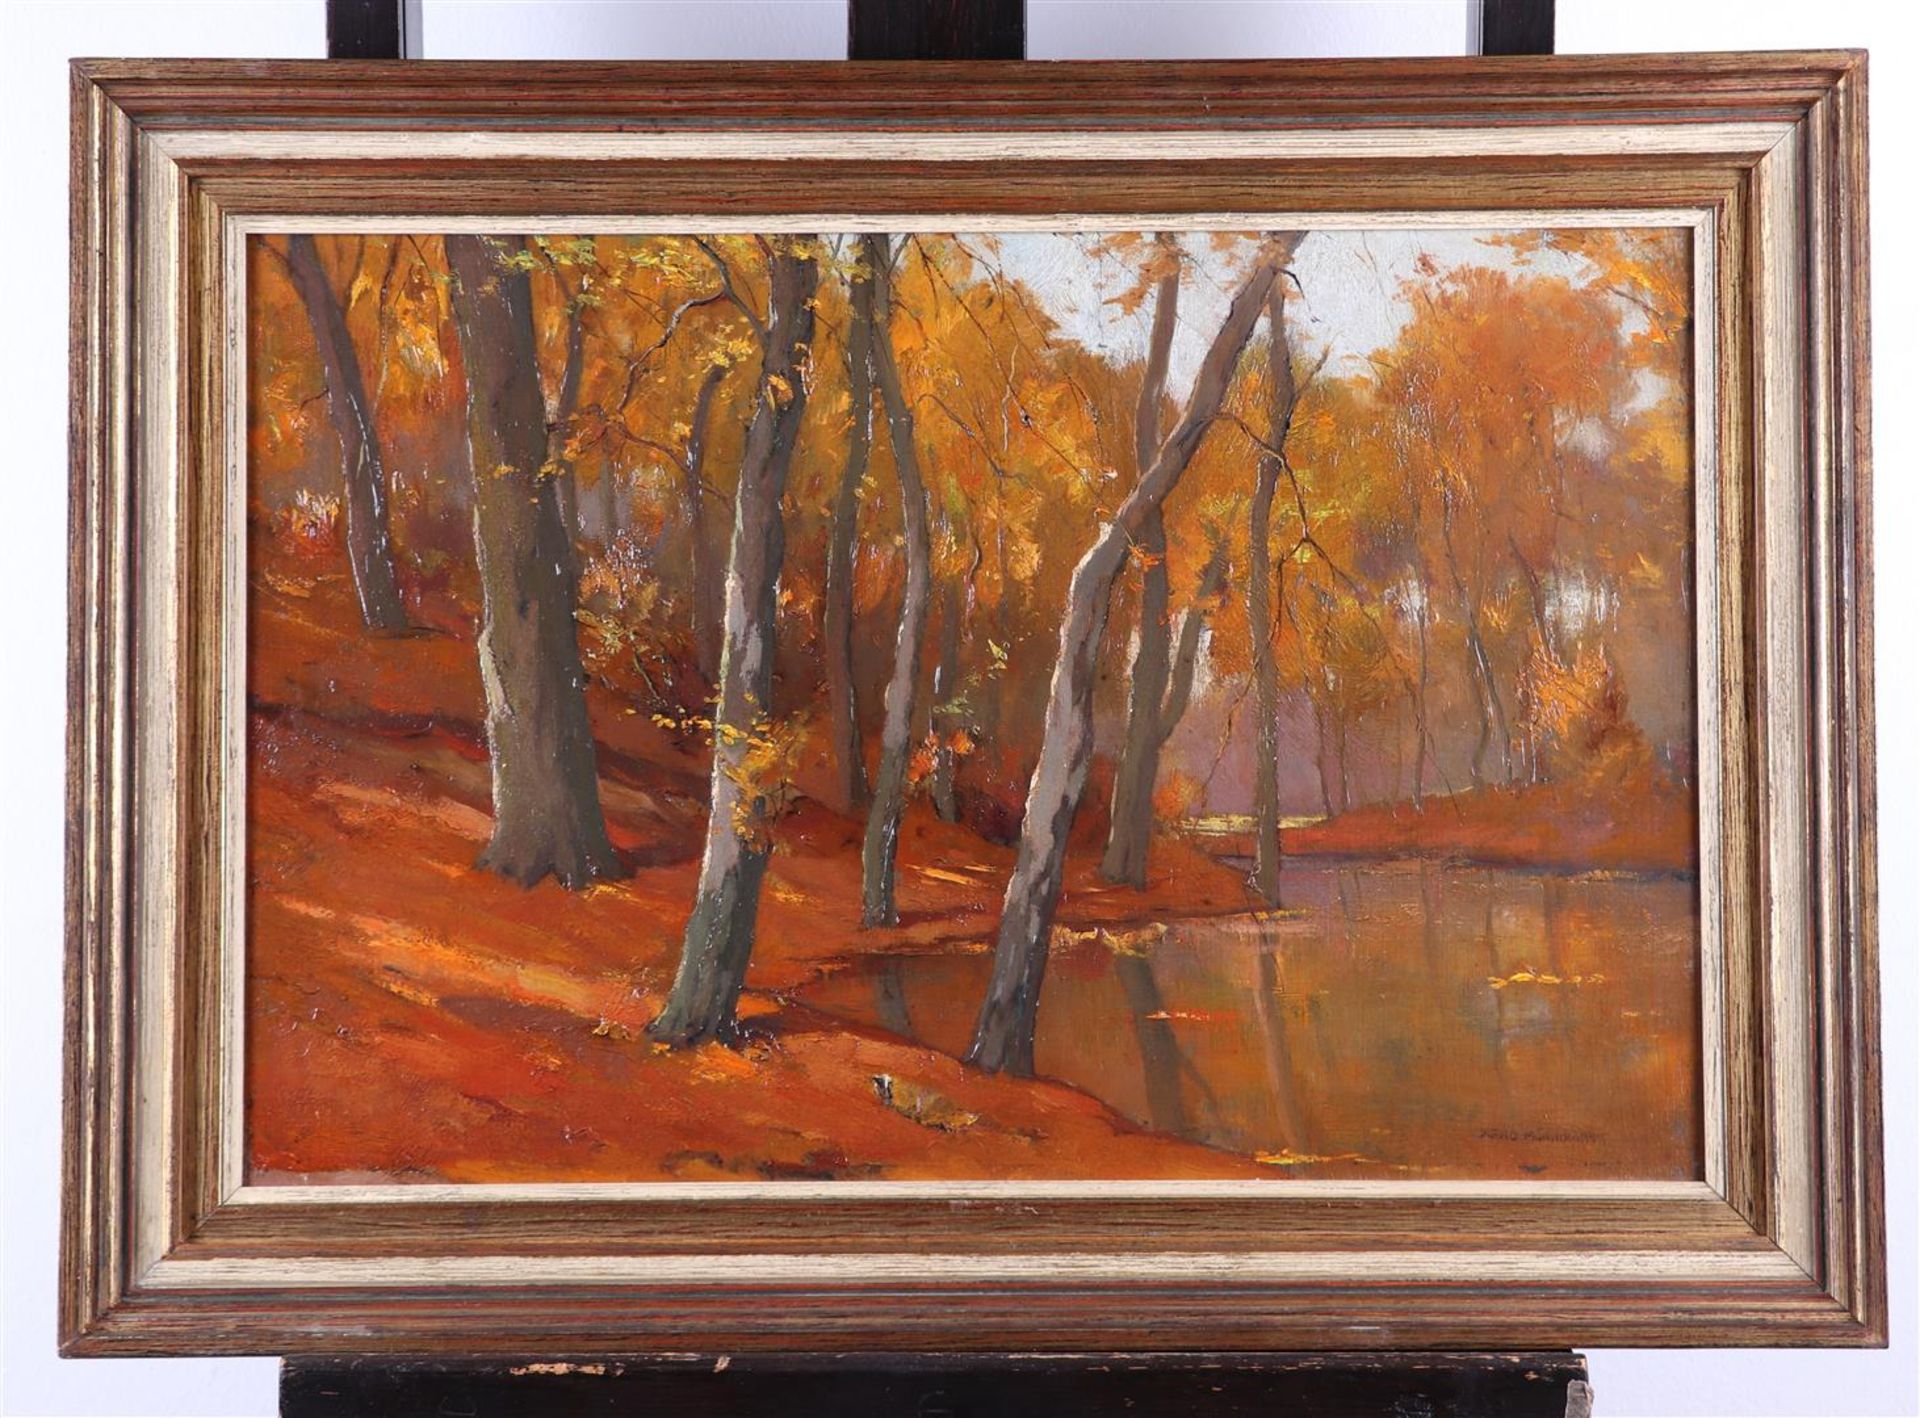 Xeno Munninghoff (Deventer 1873 - 1943 Barneveld), Kwelbeek in Oosterbeek in autumn colours - Image 2 of 4